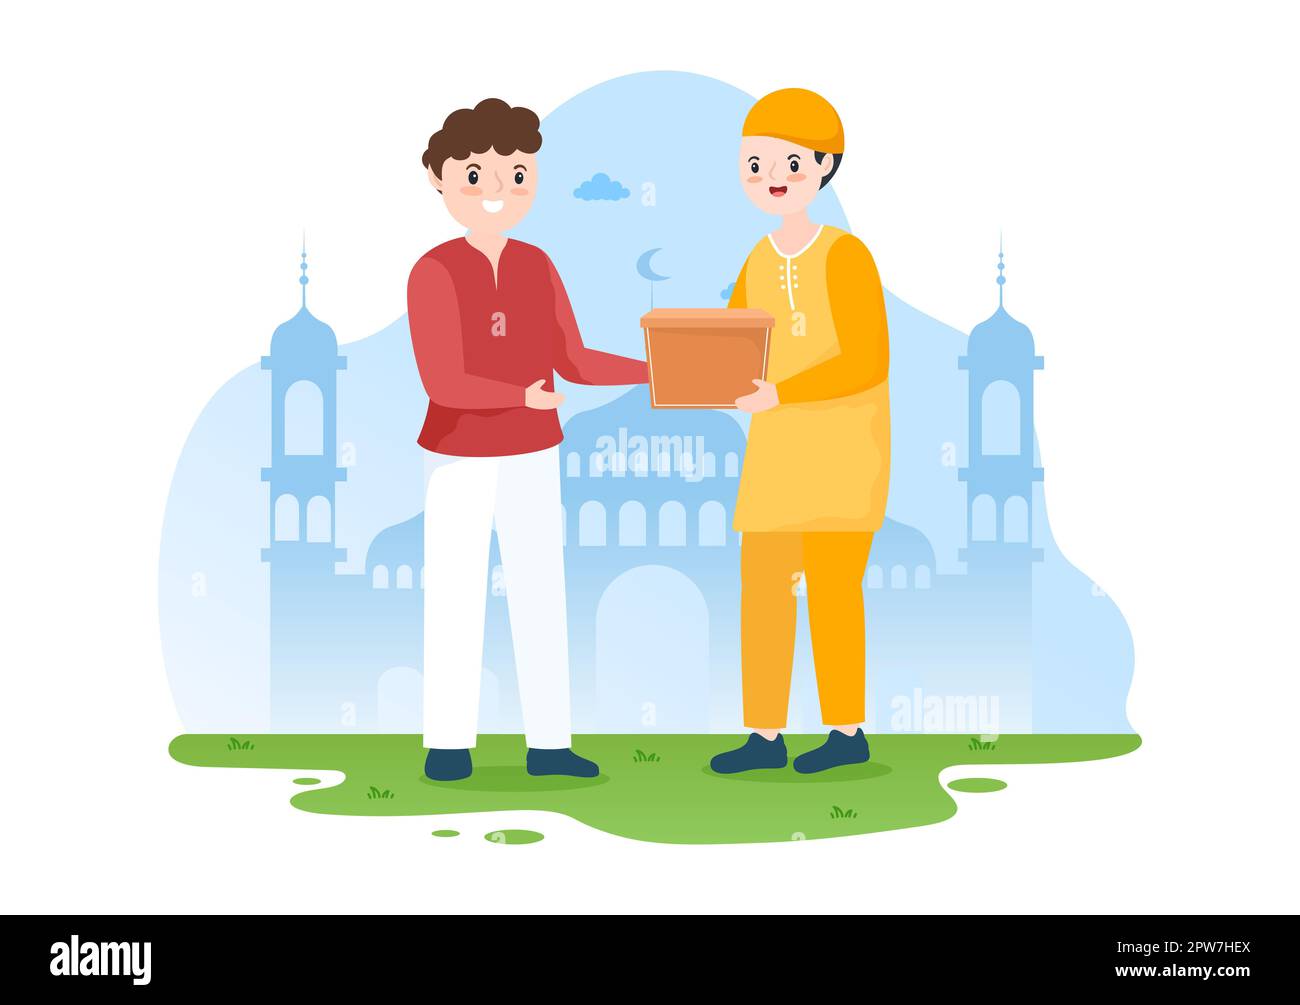 Muslim People Giving Alms, Zakat or Infaq Donation to a Person Who Need it in Flat Cartoon Poster Hand Drawn Templates Illustration Stock Photo